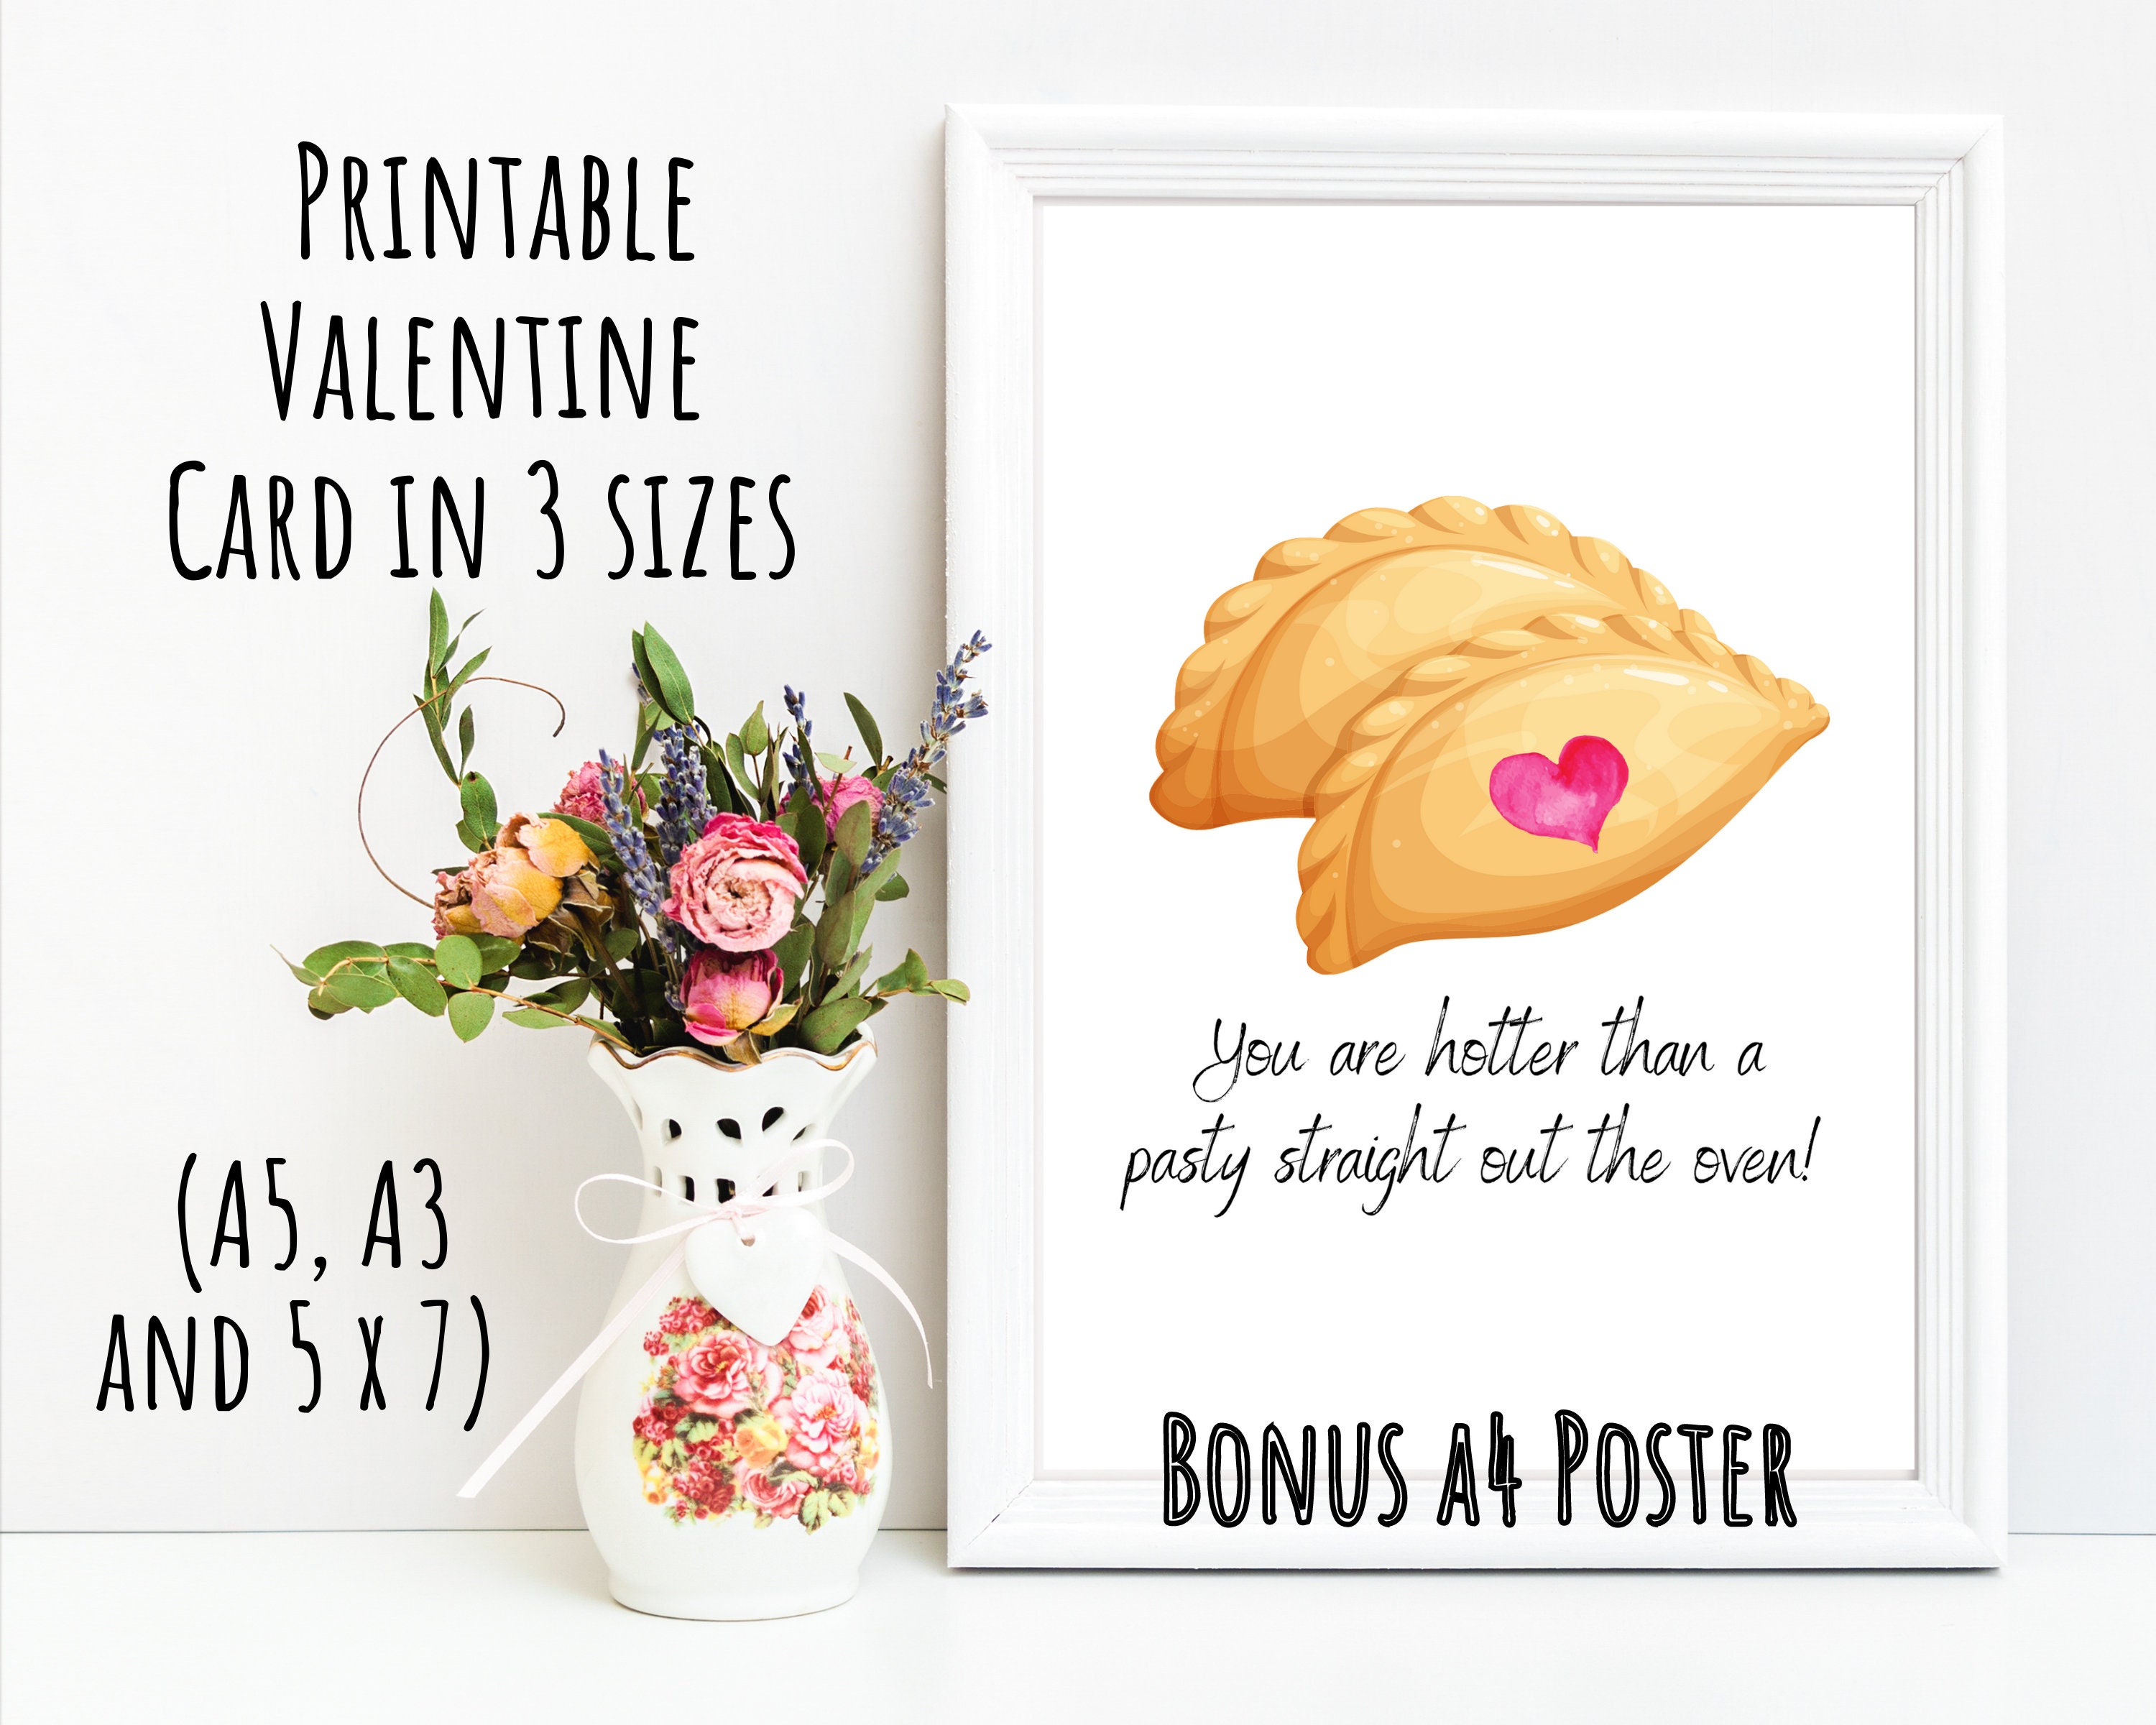 Funny Valentines card Cornish Valentines Card from Cornwall Cornish Scone Card Printable Valentines Card